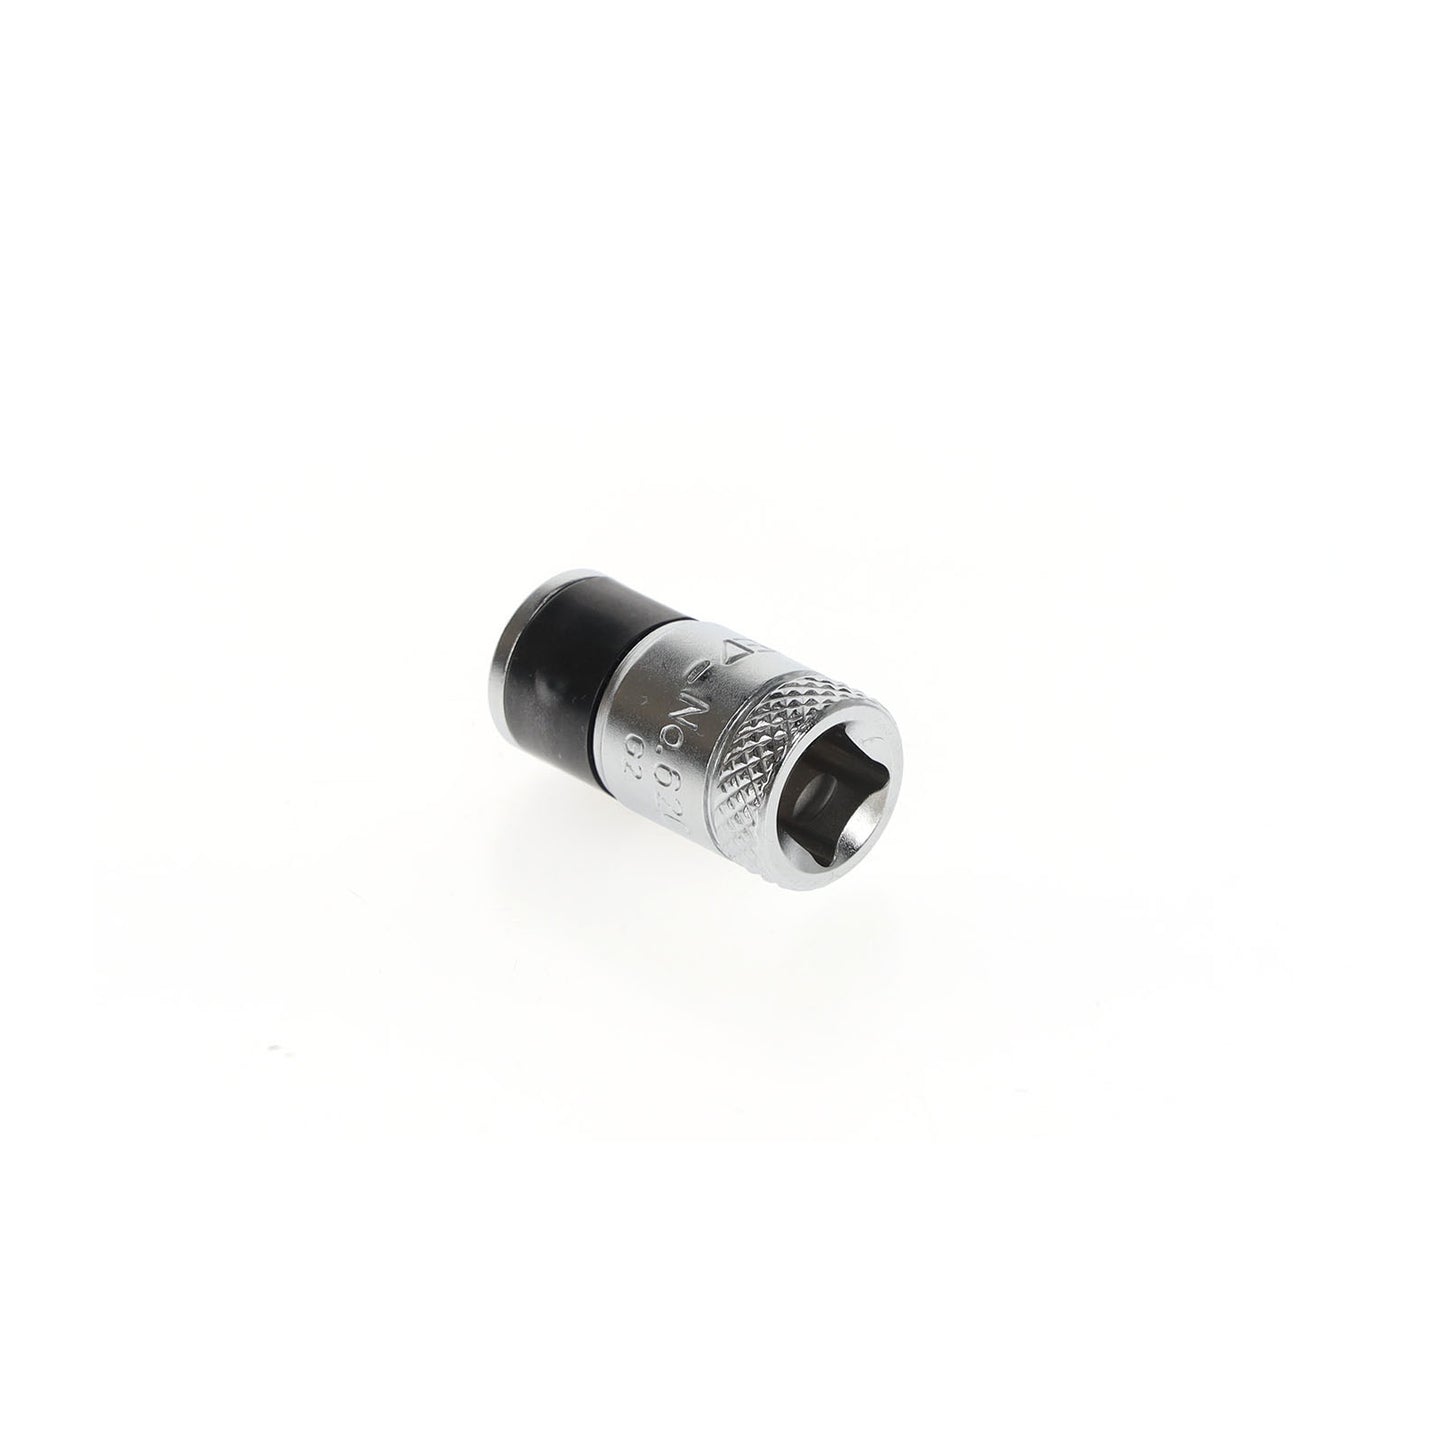 GEDORE 620 - 1/4" Adapter to 1/4" Bits (1649329)